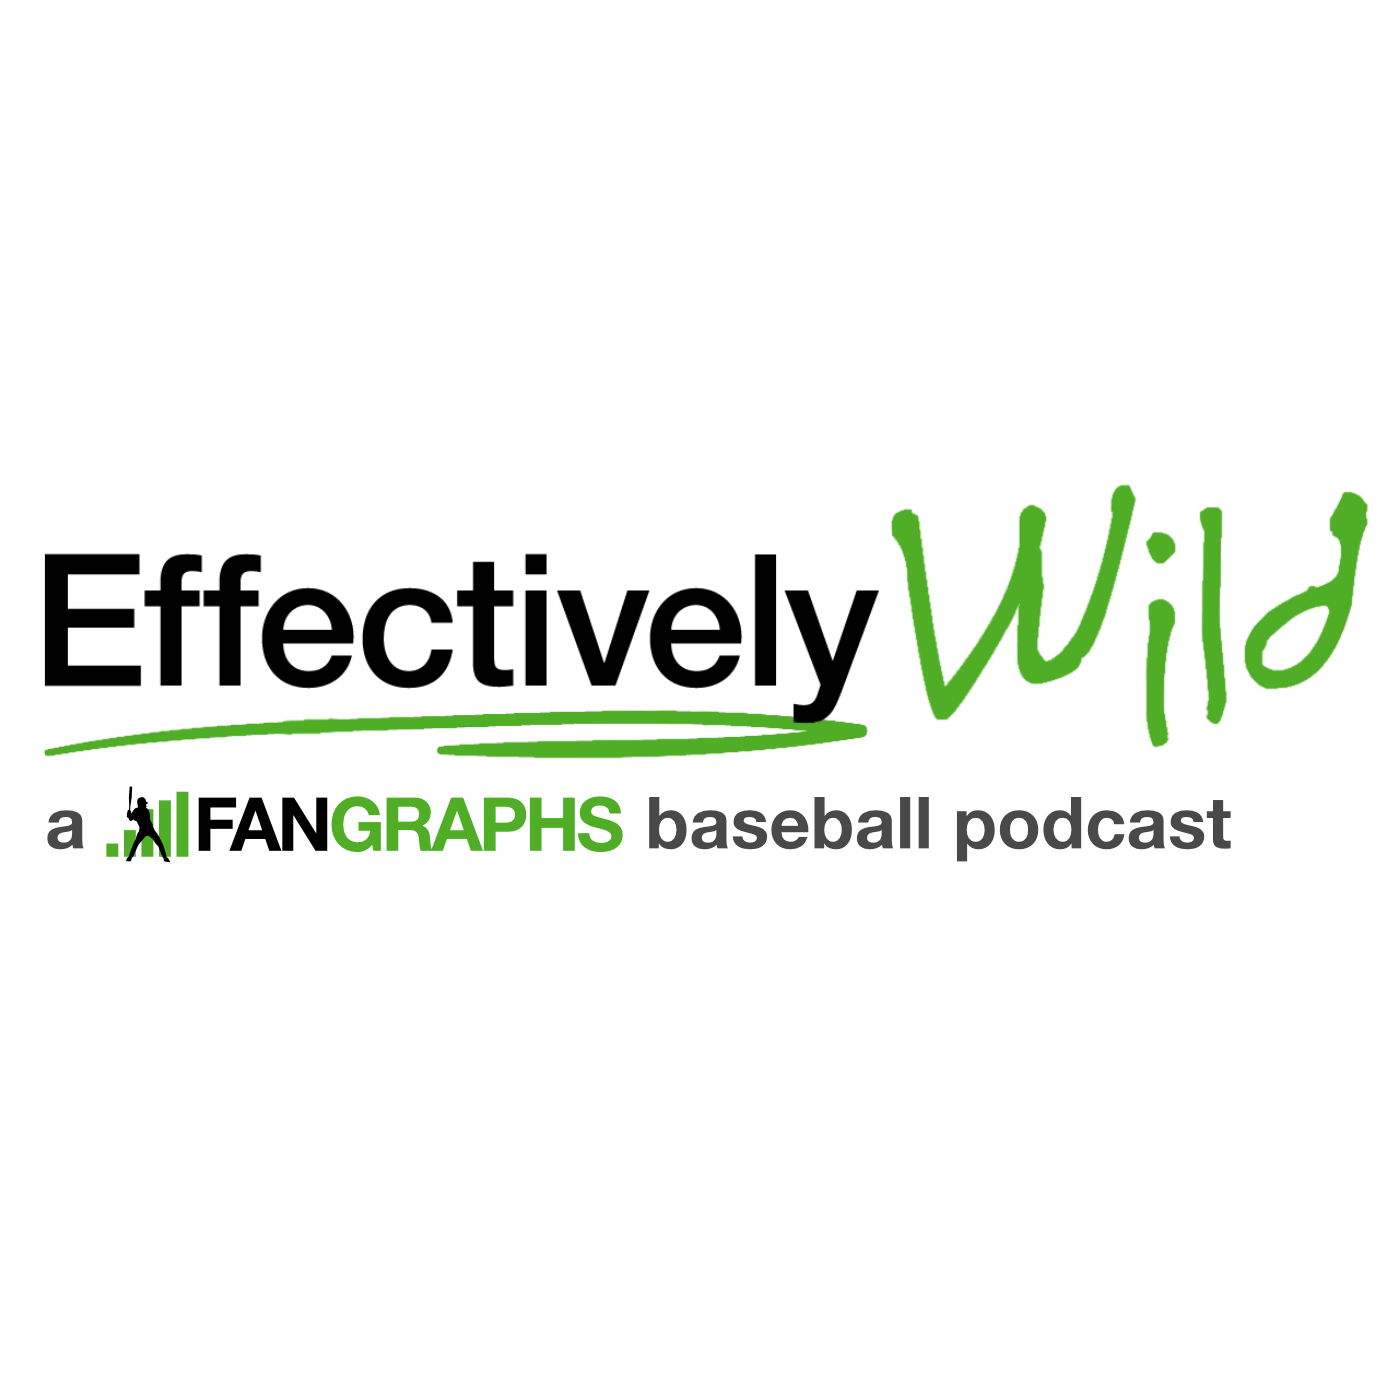 A highlight from Effectively Wild Episode 1878: The 10th Anniversary Draft